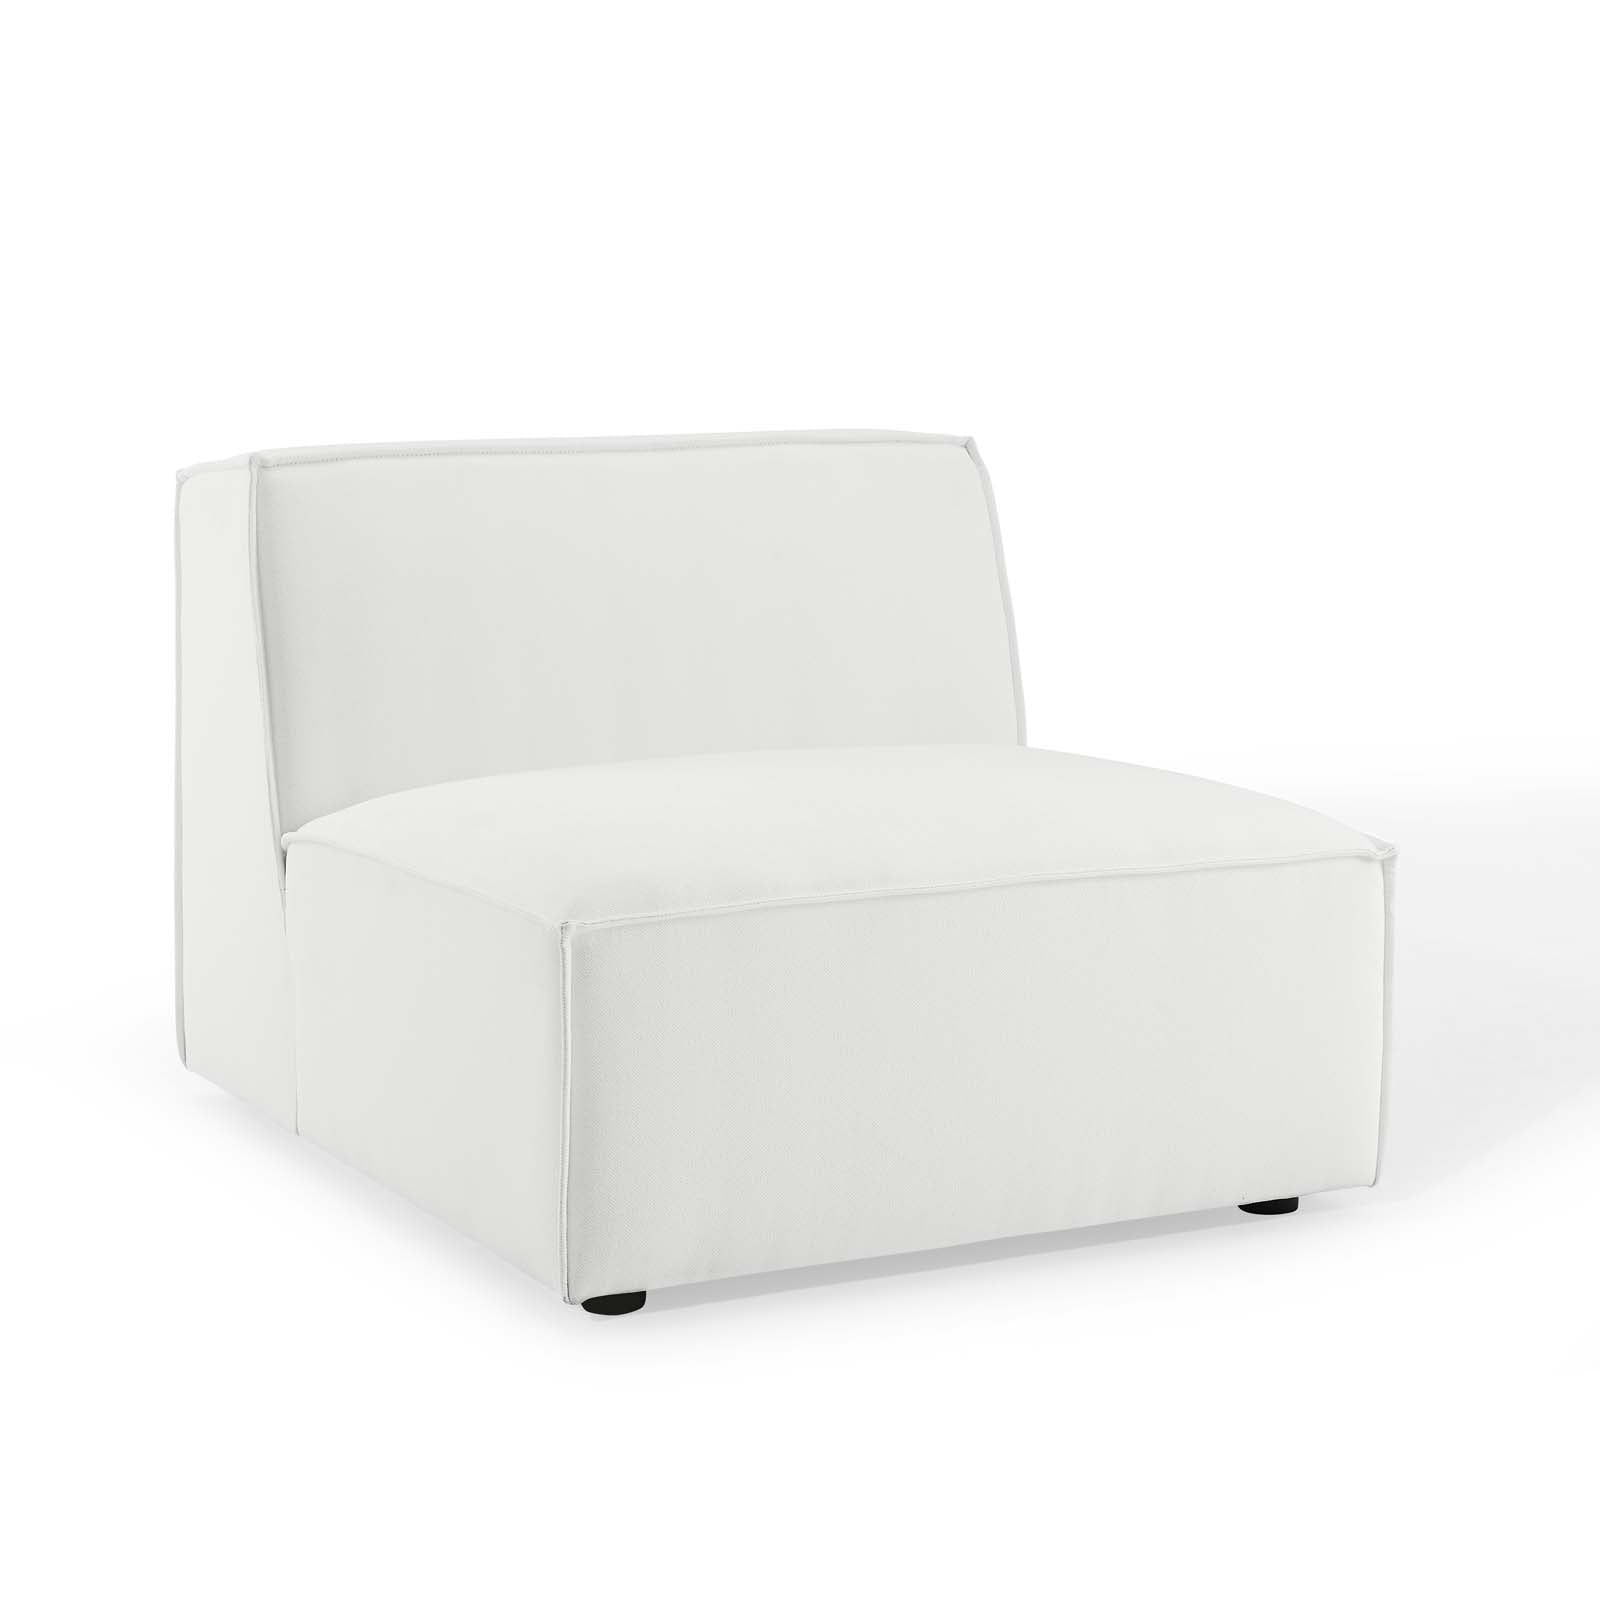 Modway Sectional Sofas - Restore 5-Piece Sectional Sofa White 164"